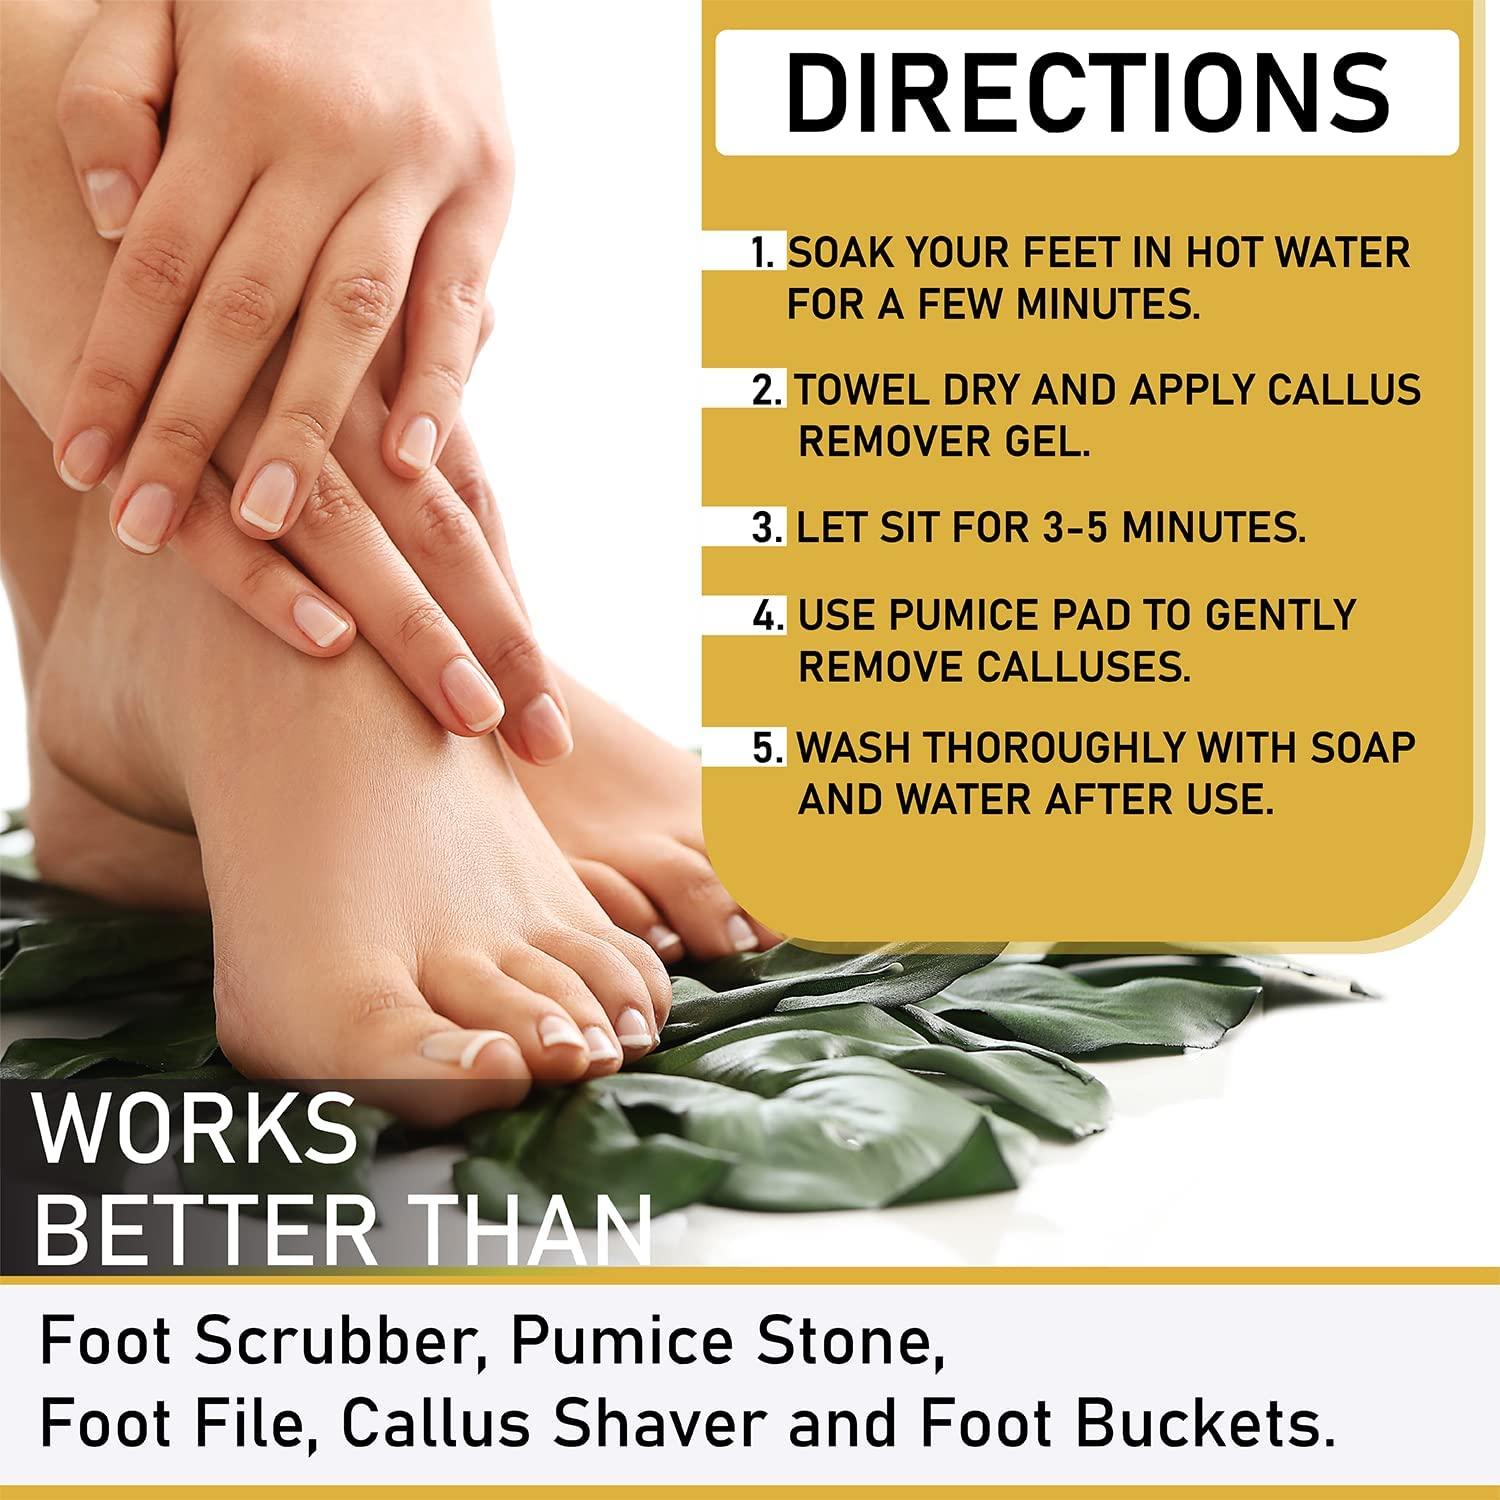 Foot Cure Extra Strength Foot Callus Remover Gel & Foot at-Home